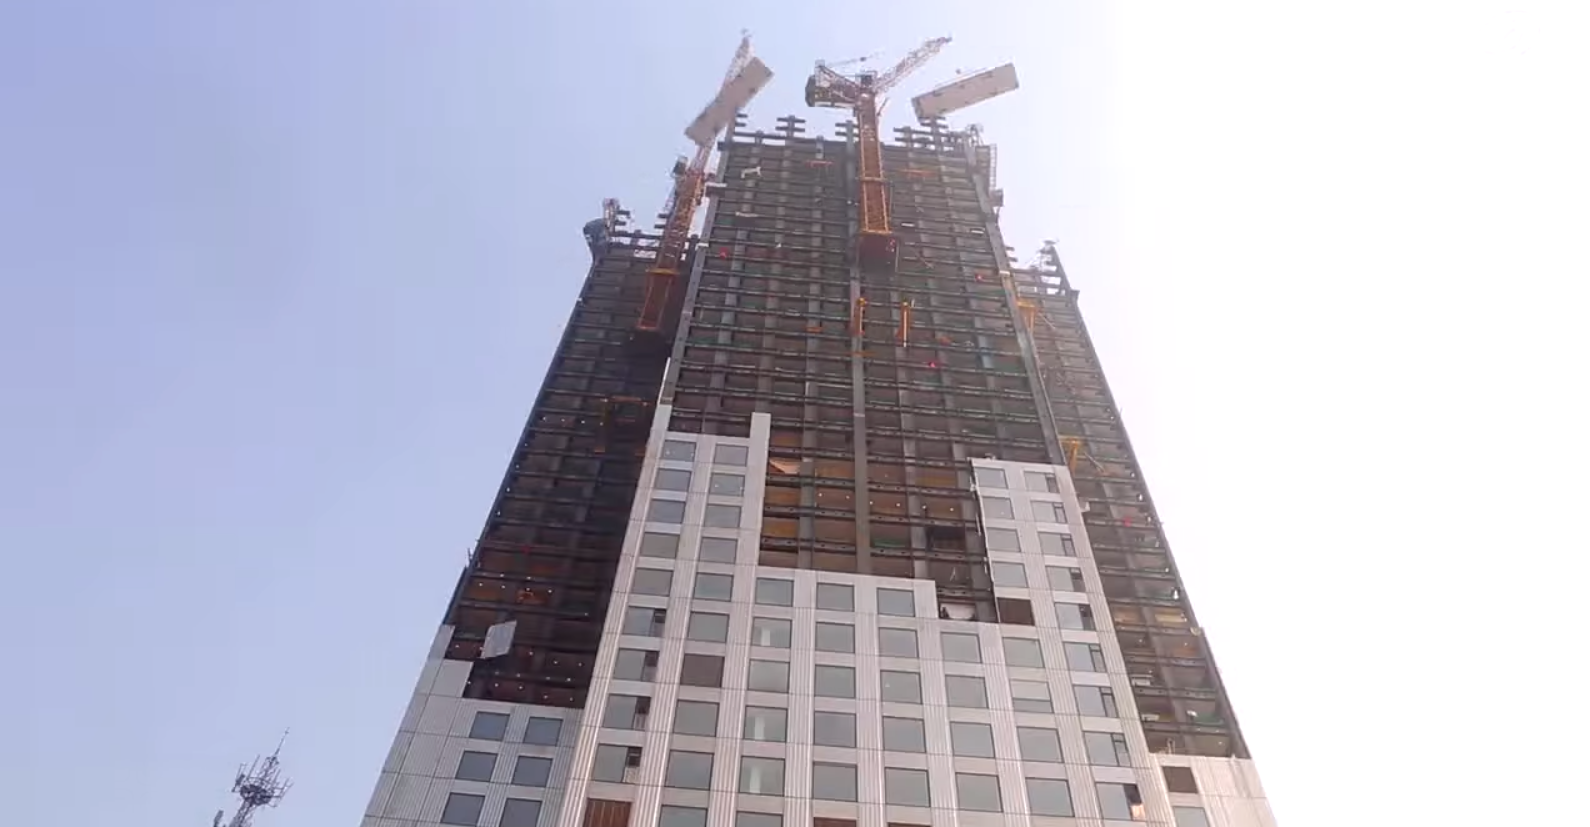 A 57-floor Chinese skyscraper was completed in 19 days